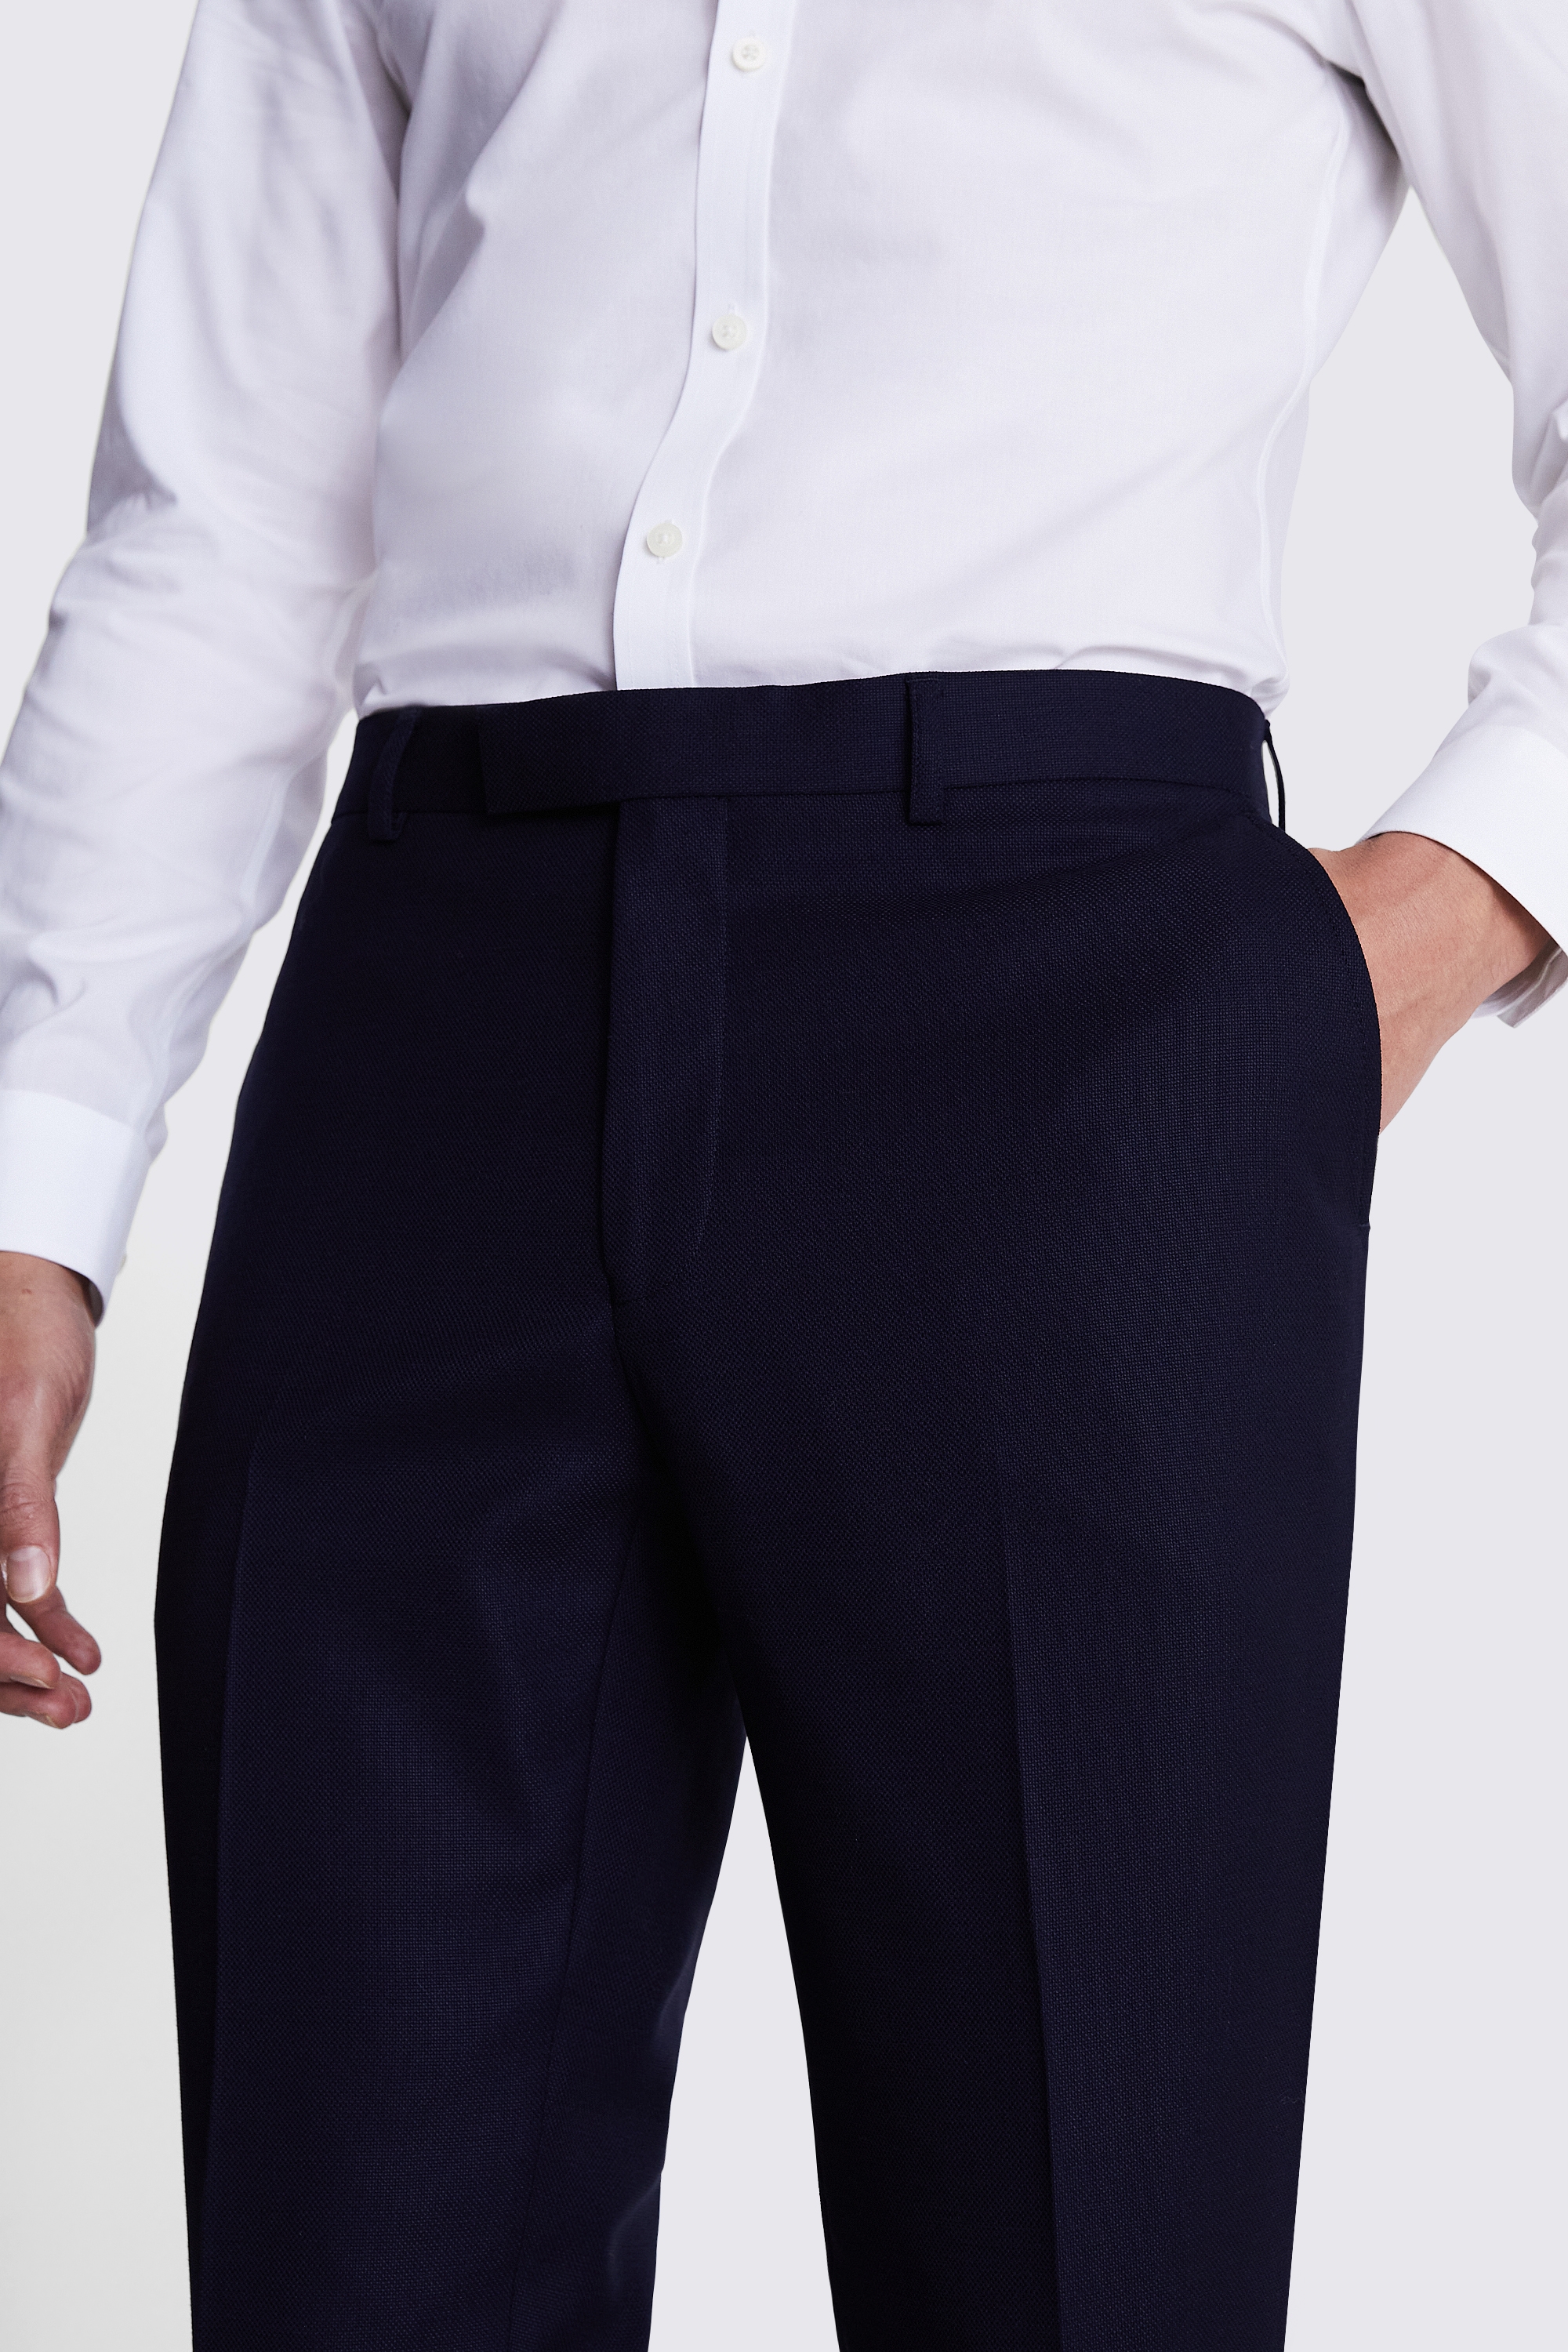 Italian Slim Fit Navy Hopsack Trousers | Buy Online at Moss